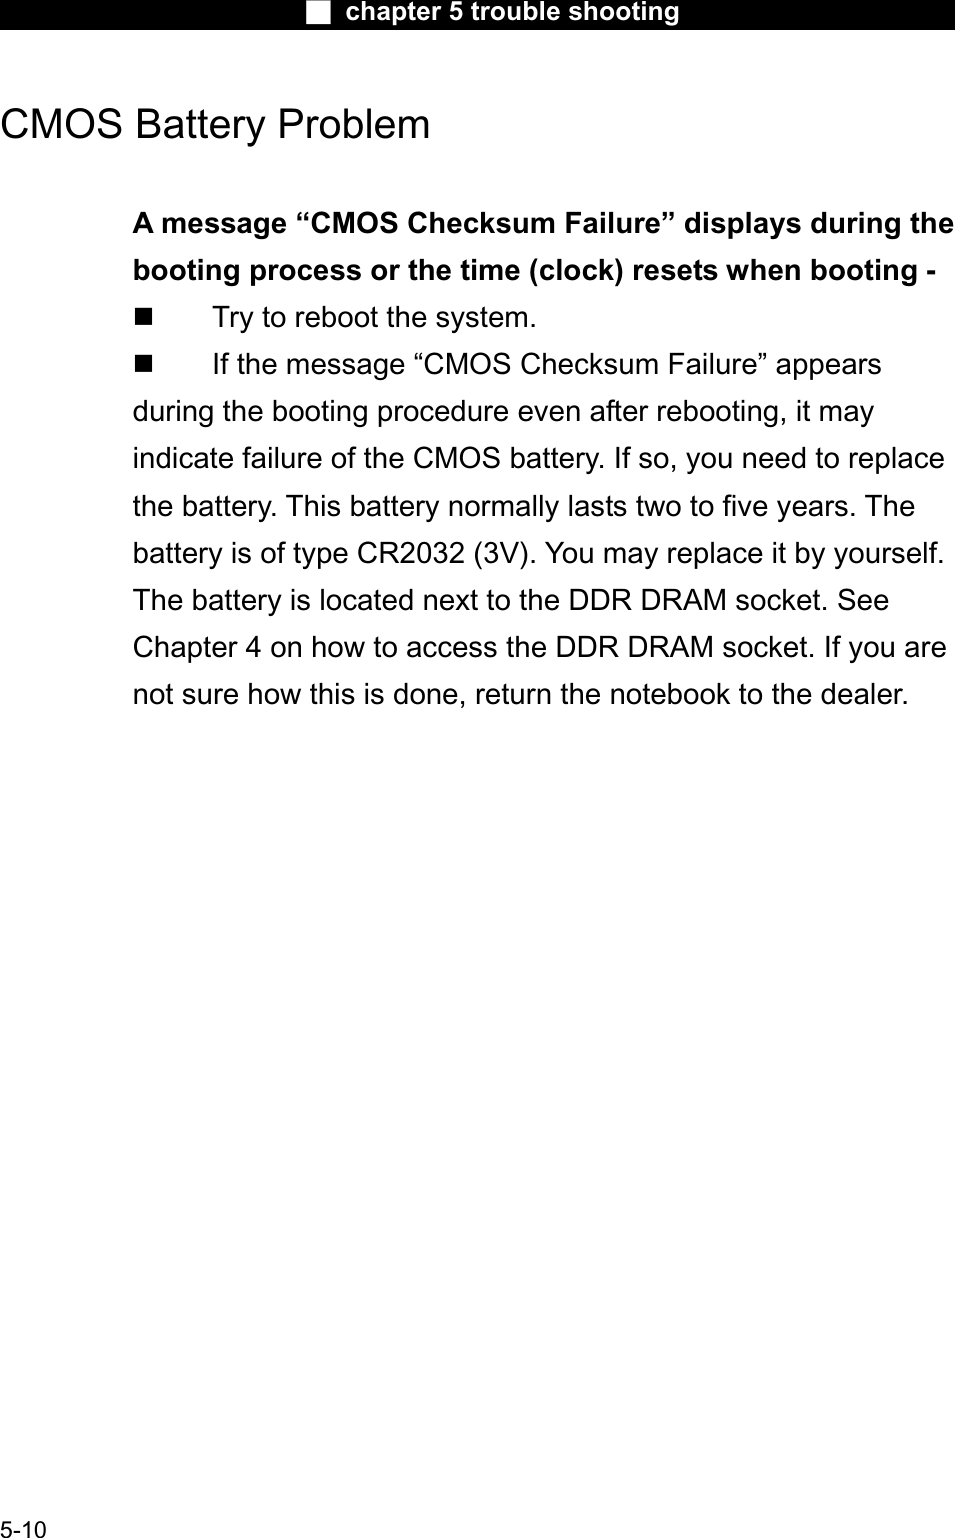 Ϯ chapter 5 trouble shootingCMOS Battery Problem A message “CMOS Checksum Failure” displays during the booting process or the time (clock) resets when booting -  Try to reboot the system.  If the message “CMOS Checksum Failure” appearsduring the booting procedure even after rebooting, it may indicate failure of the CMOS battery. If so, you need to replacethe battery. This battery normally lasts two to five years. Thebattery is of type CR2032 (3V). You may replace it by yourself. The battery is located next to the DDR DRAM socket. See Chapter 4 on how to access the DDR DRAM socket. If you are not sure how this is done, return the notebook to the dealer.5-10